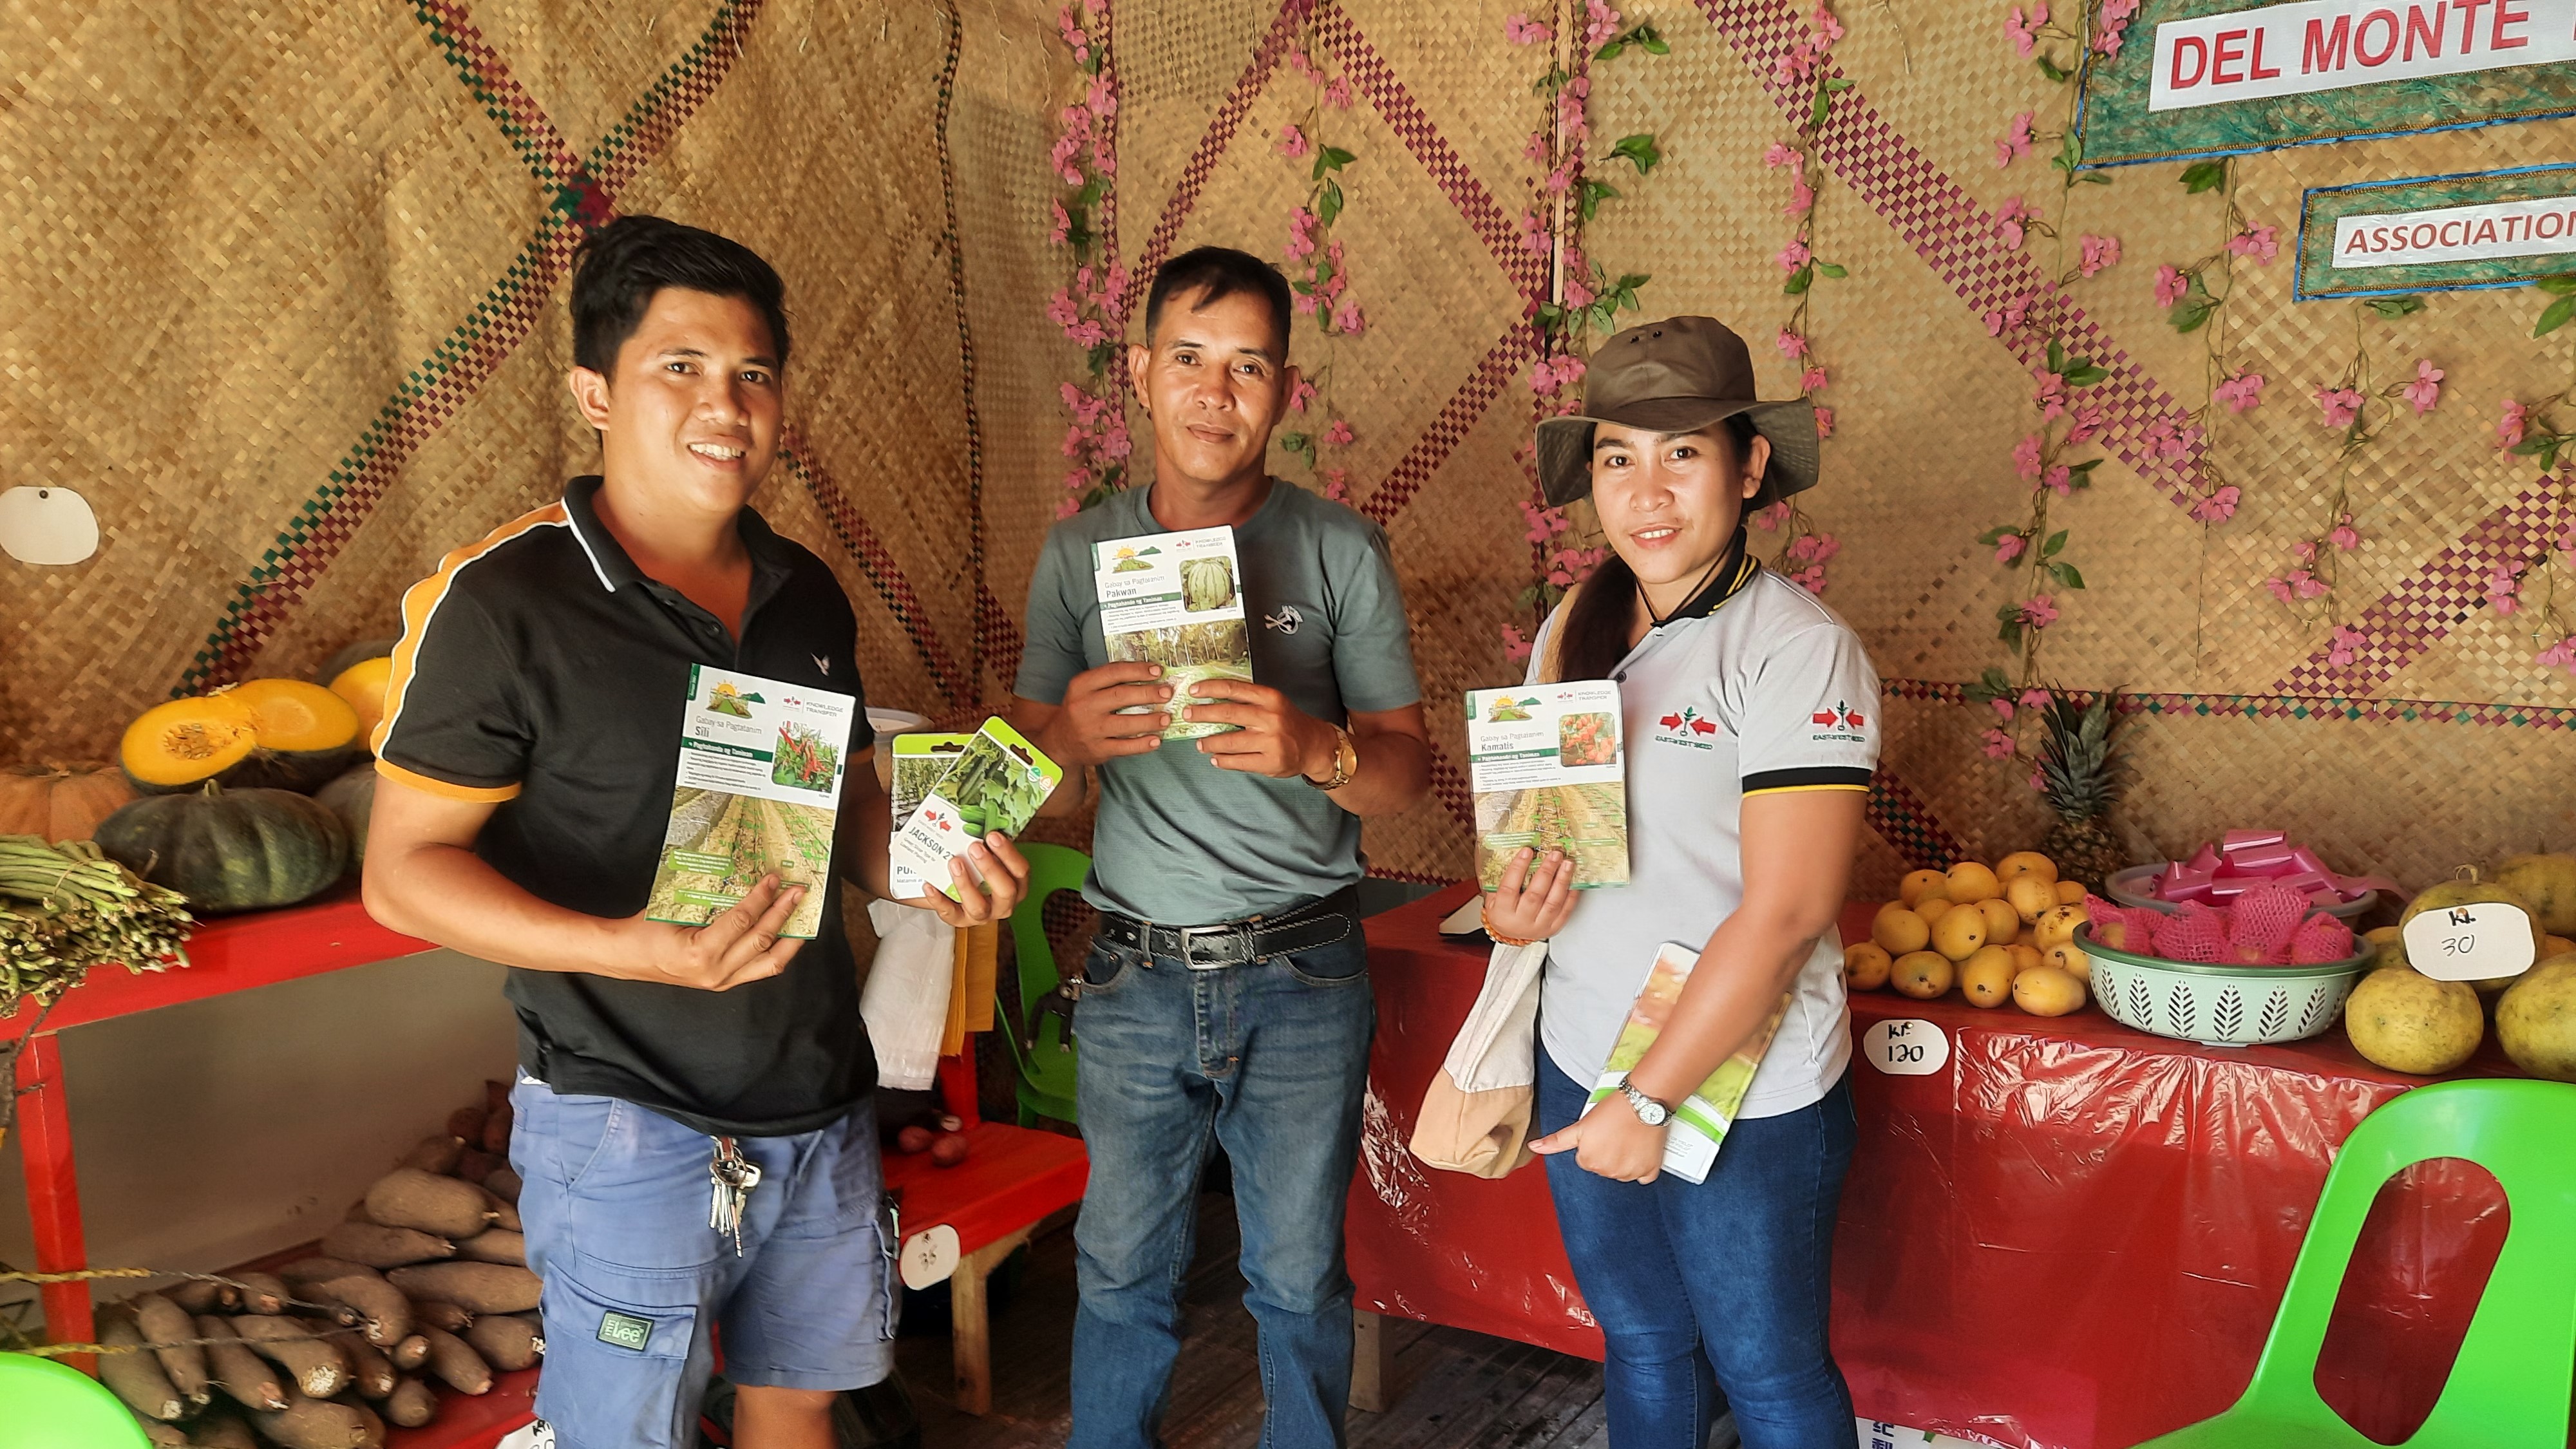 farmers stand with printed crop guides in a shop